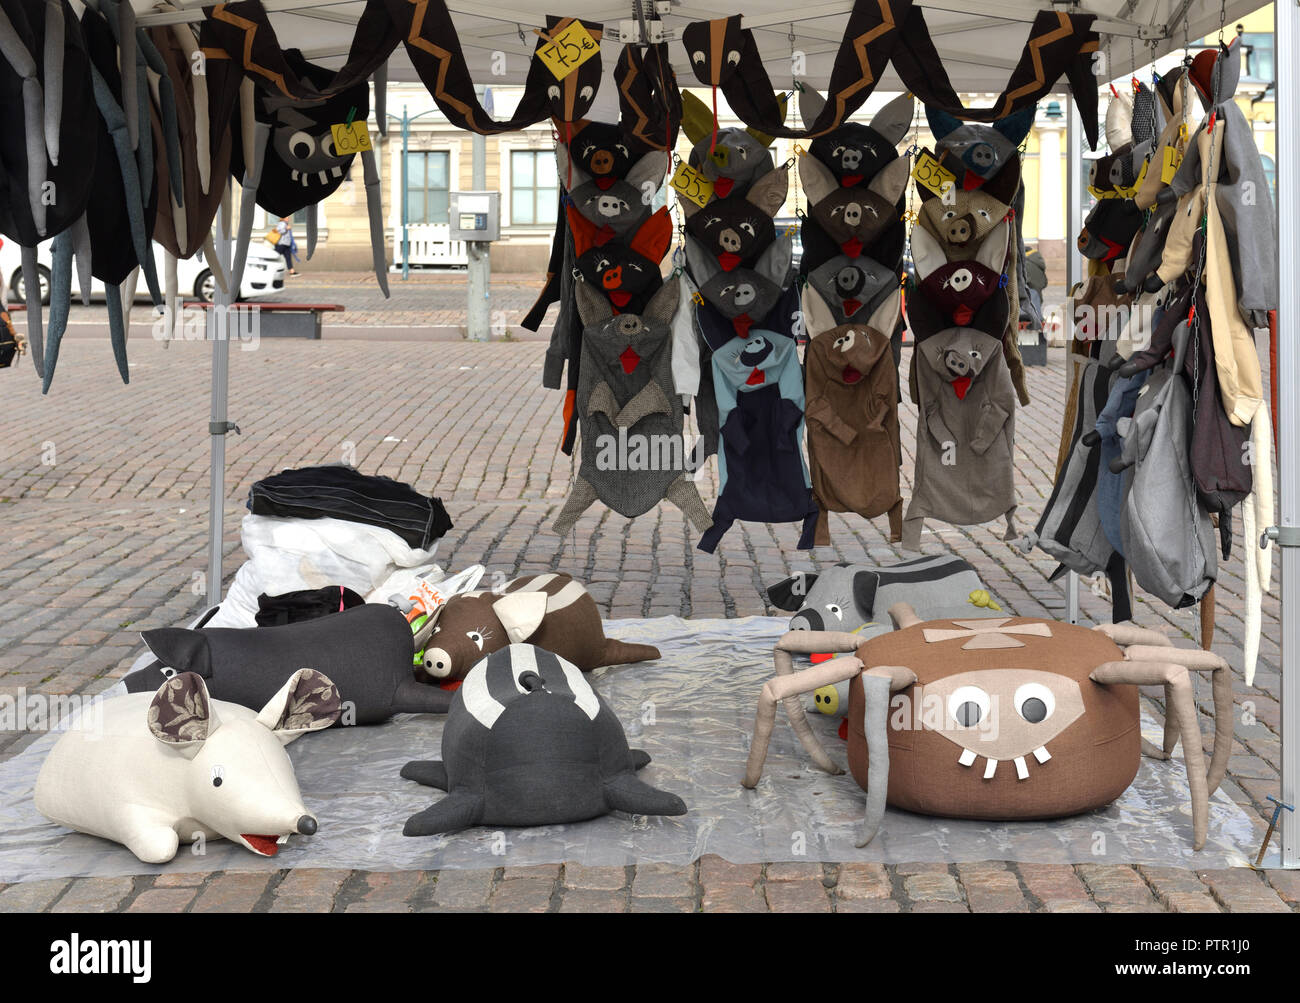 Market Square (Kauppatori). Finnish souvenirs and gifts before holiday Halloween Stock Photo